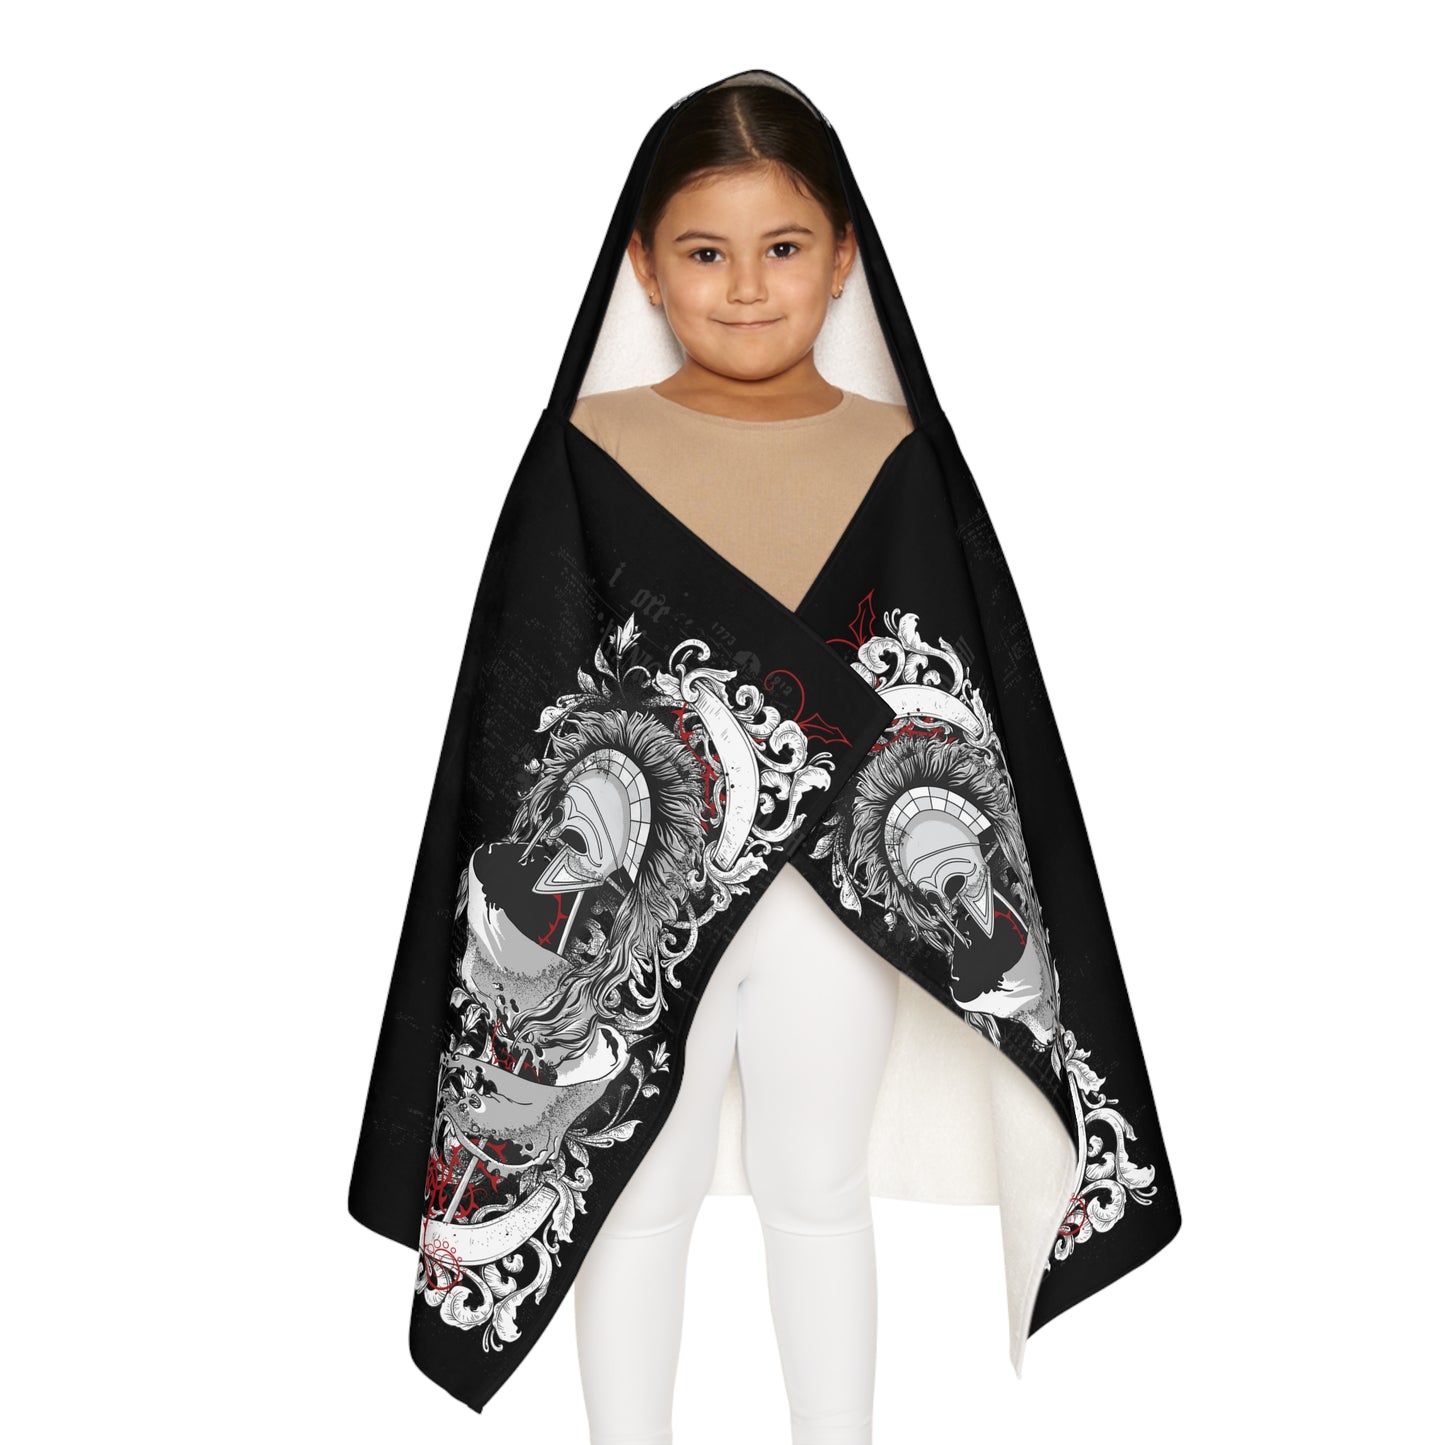 Youth Hooded Centurion Towel (Black)